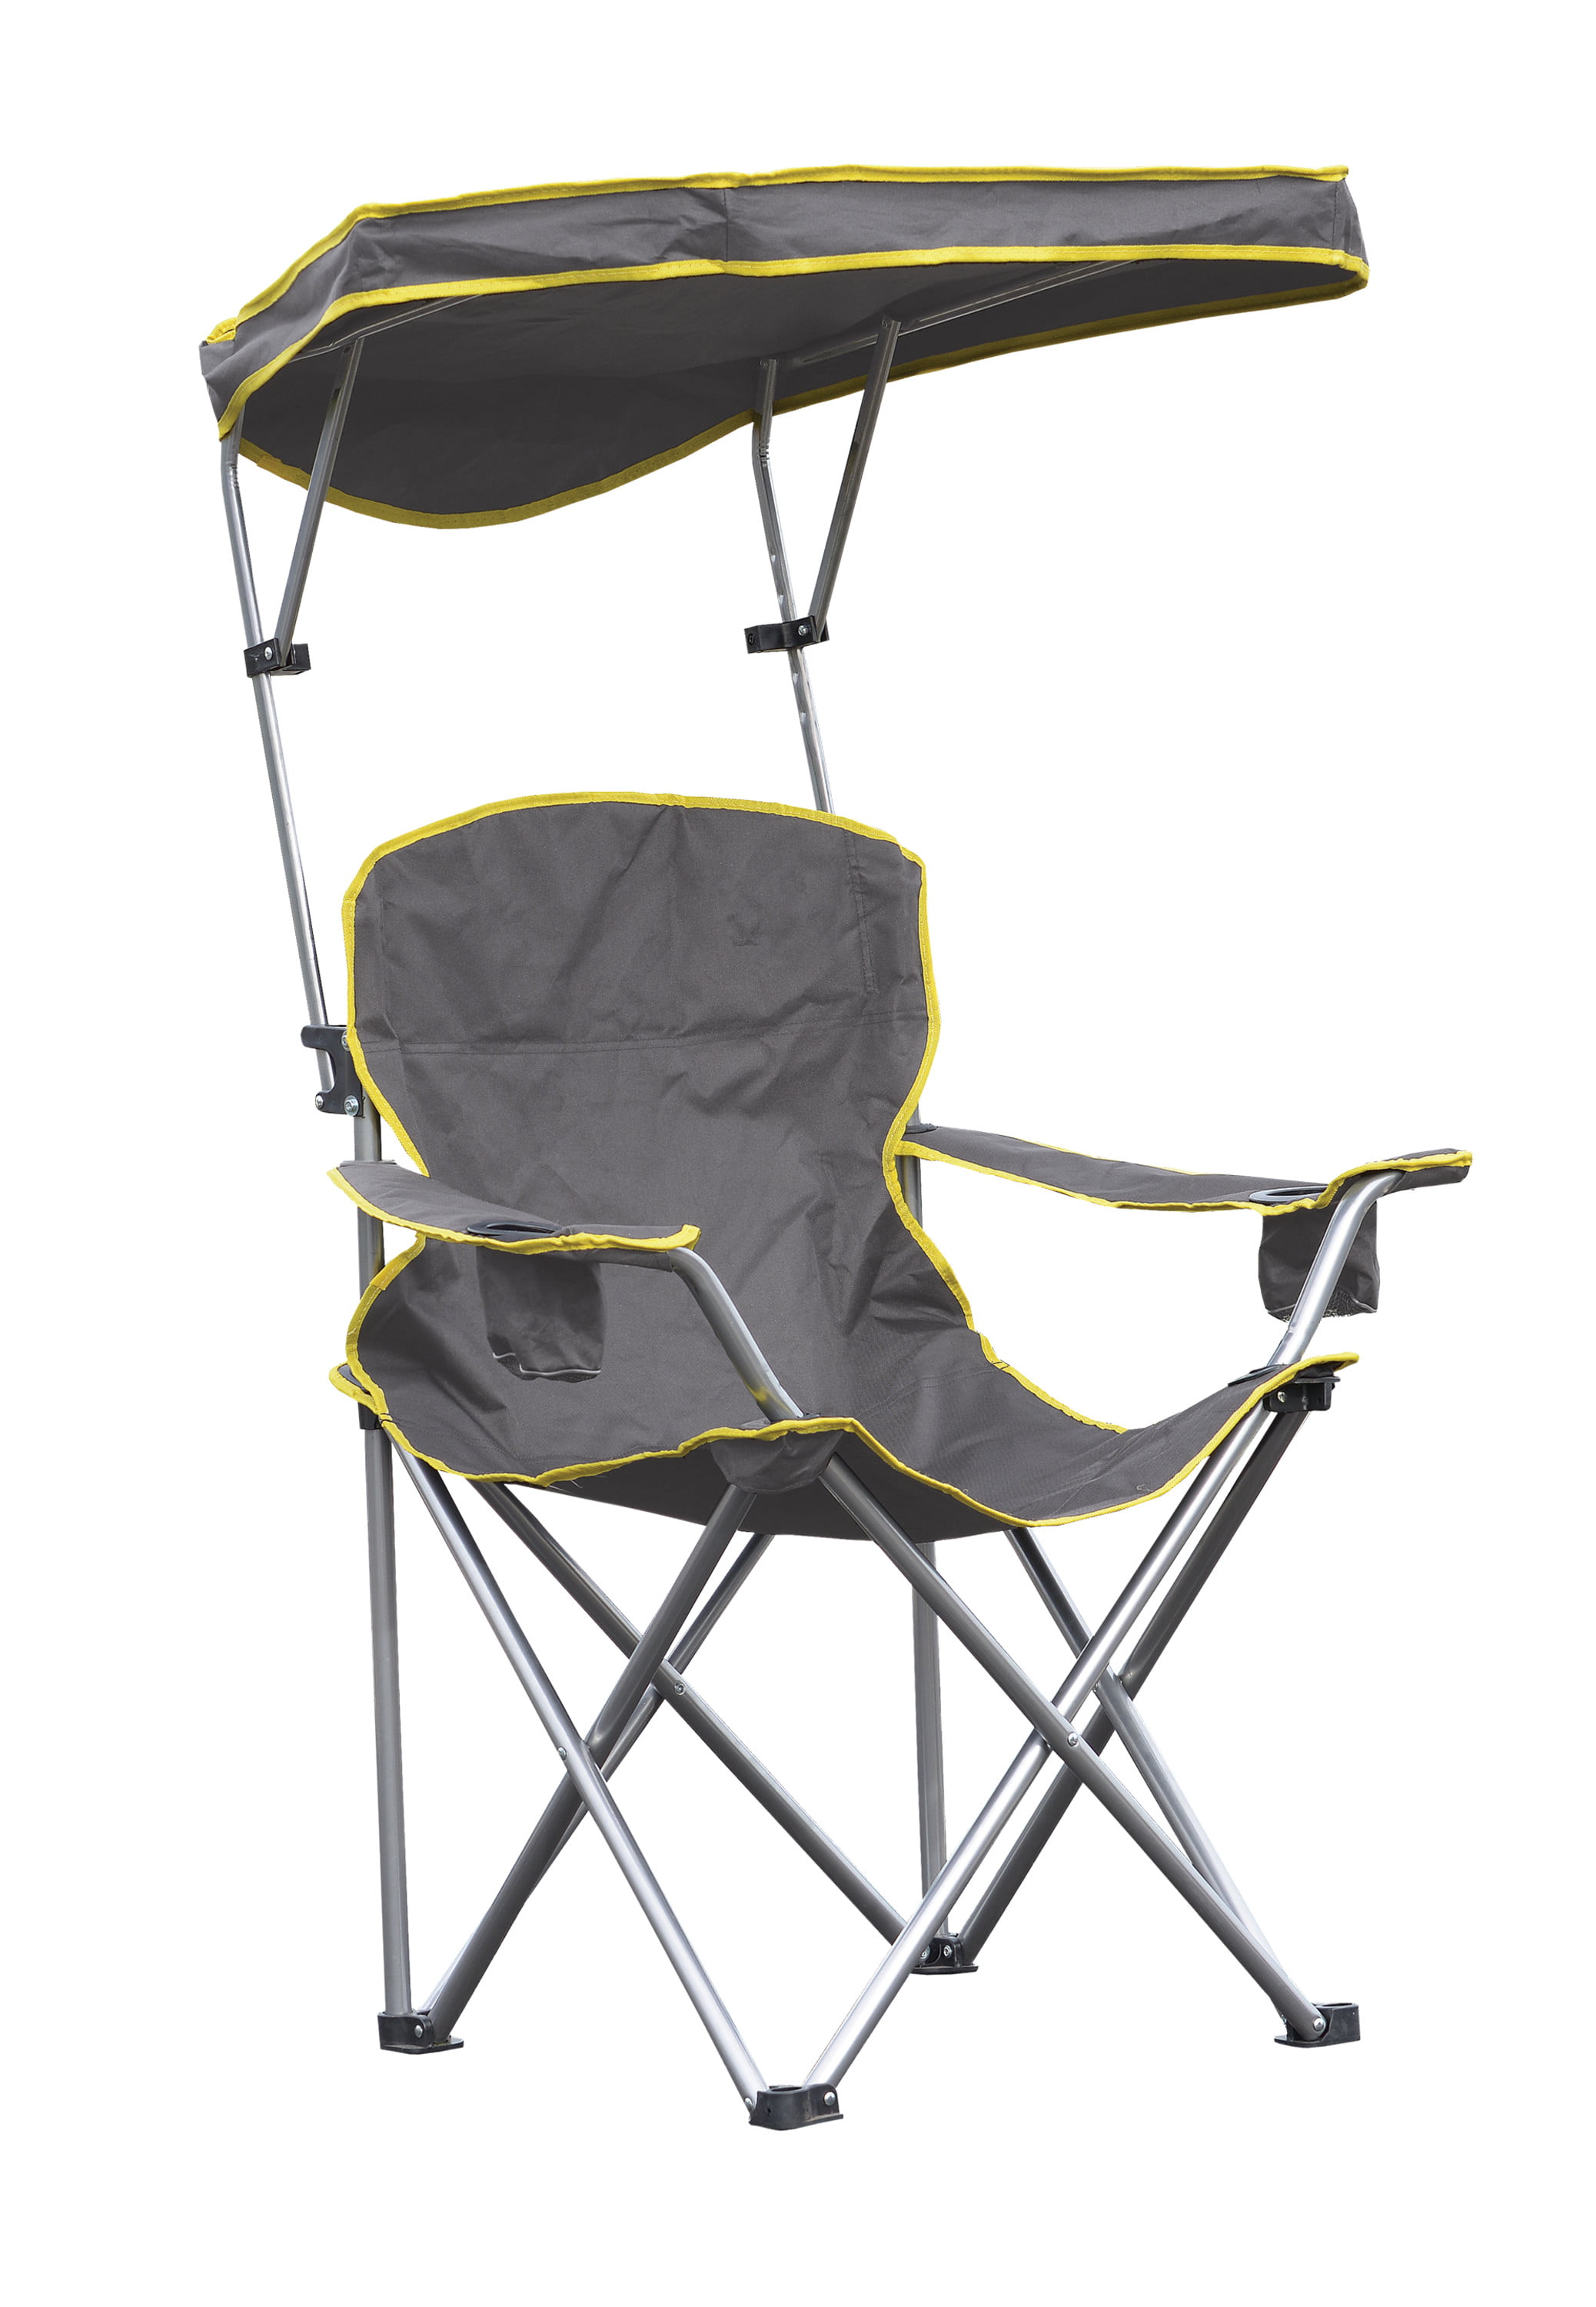 Adjustable Height Folding Chair Camping BBQ Fishing Seat Beach Lounger 